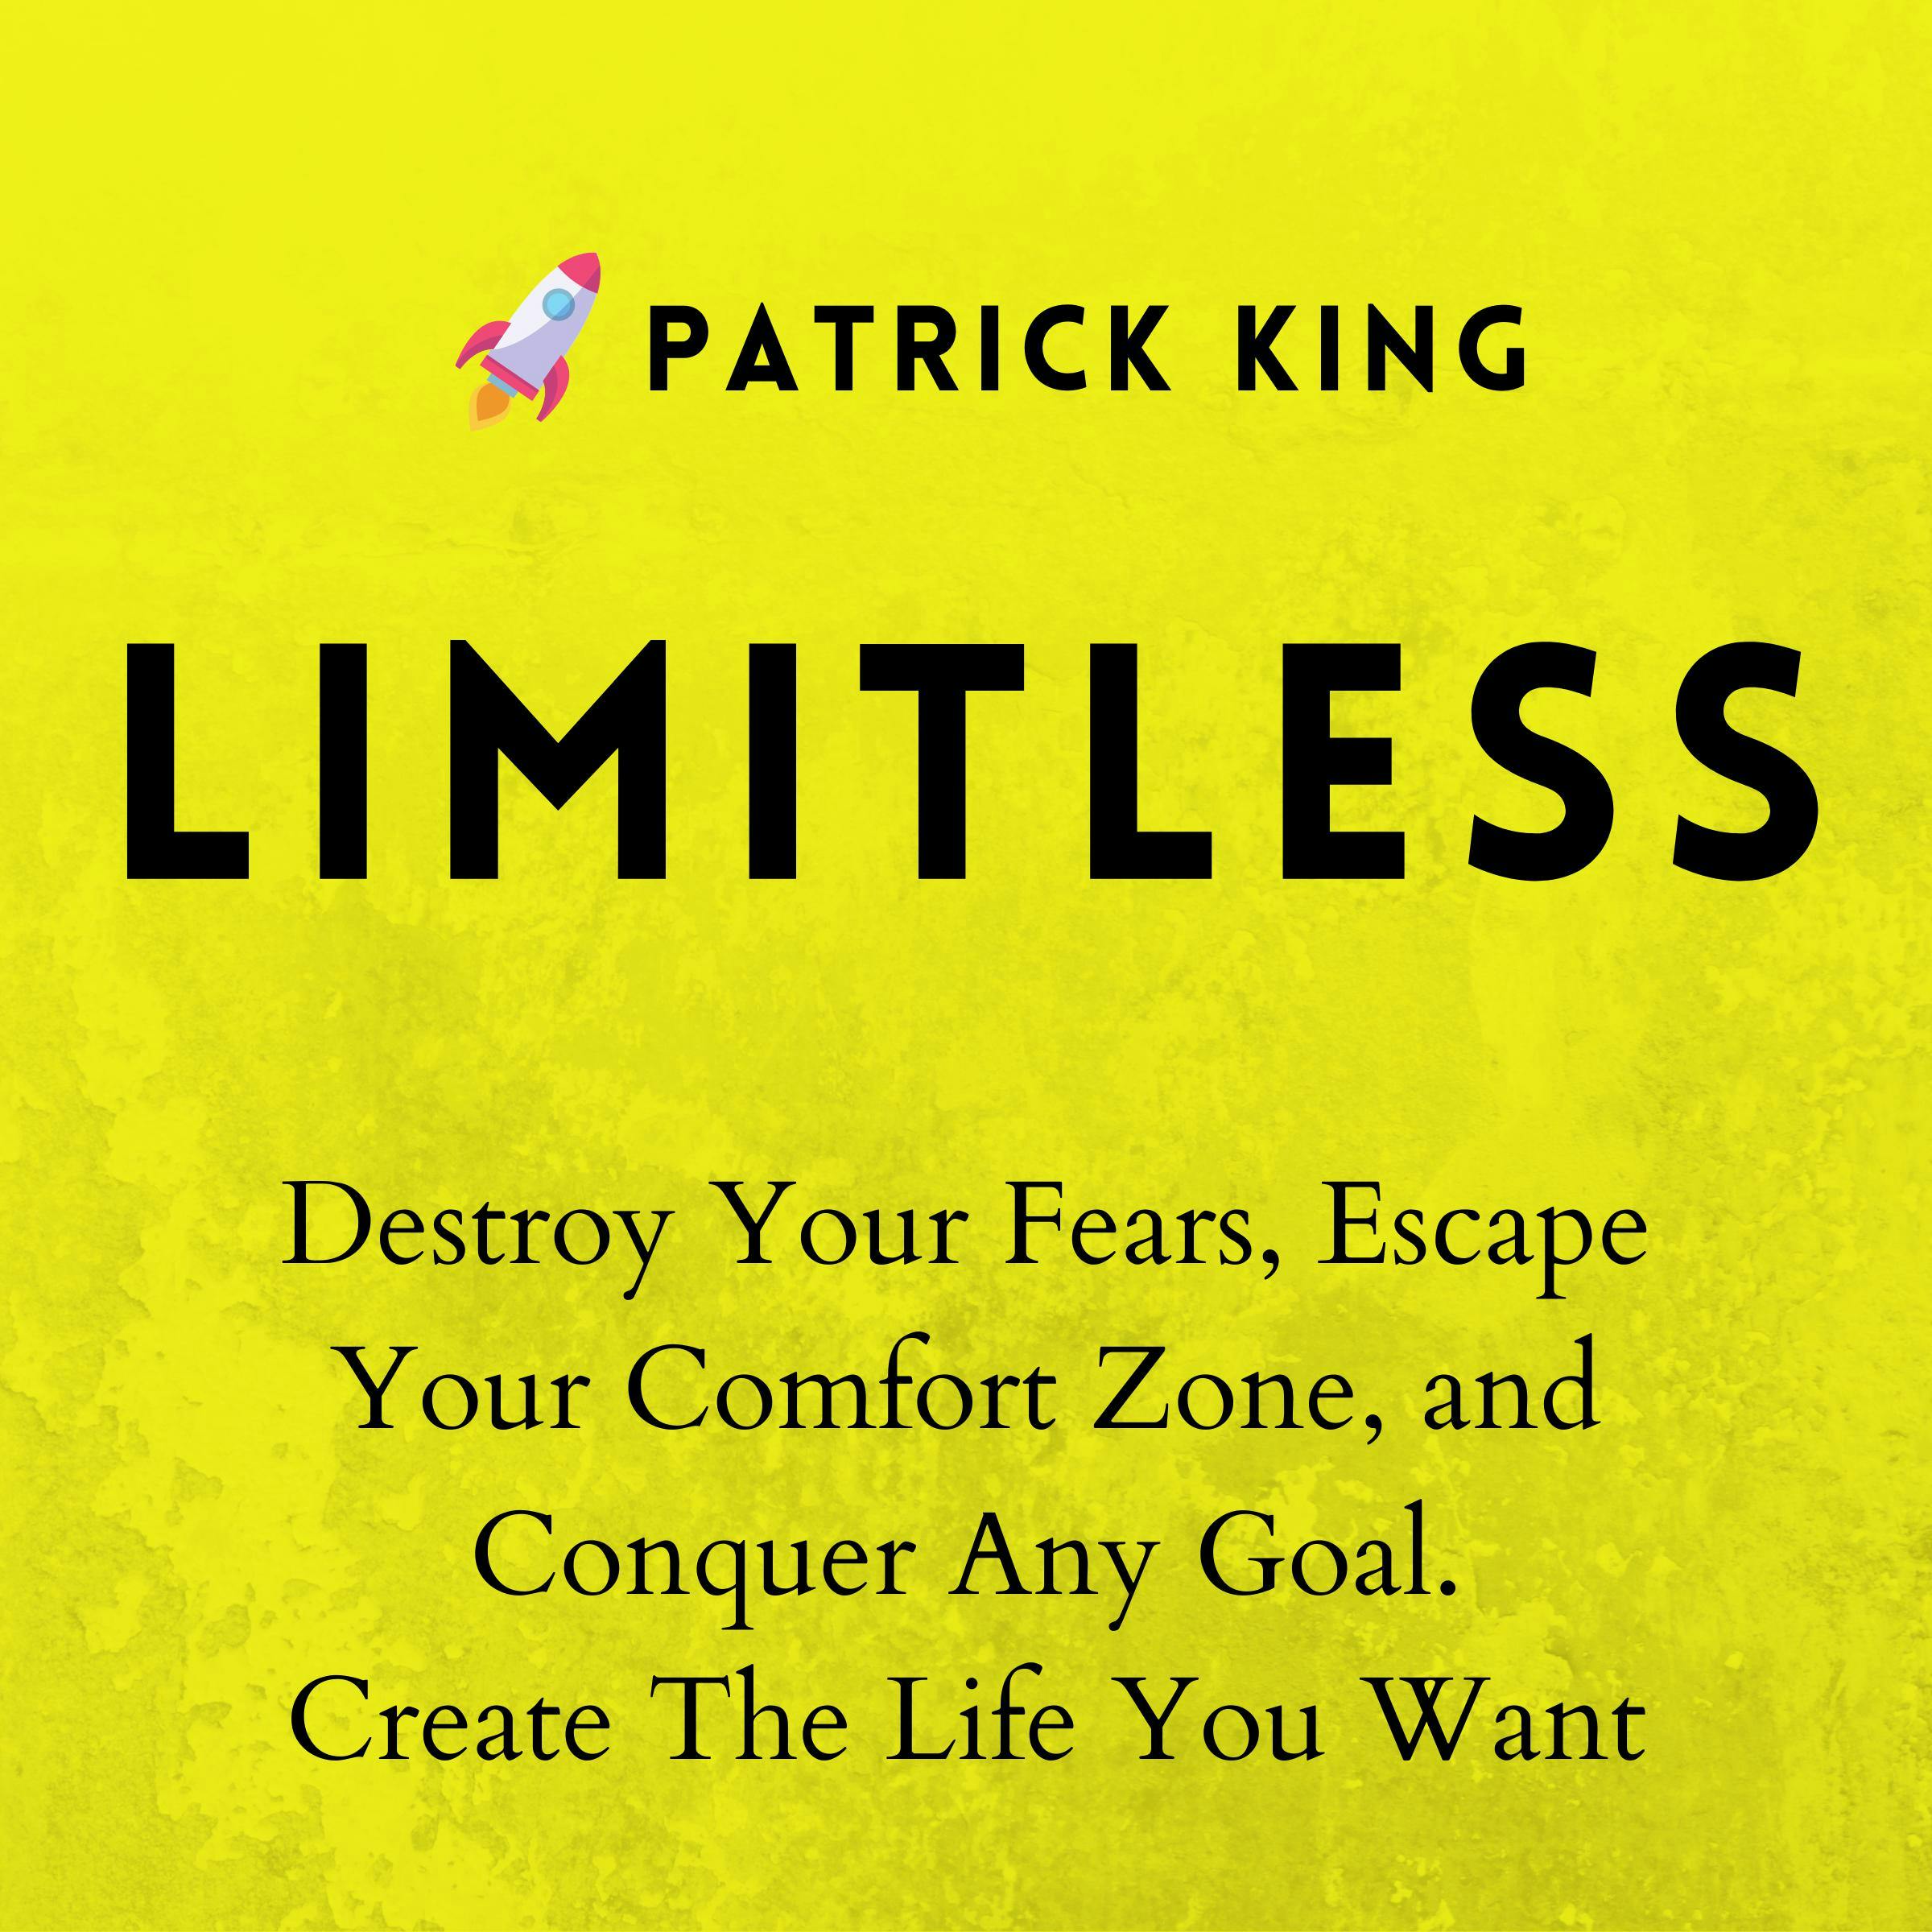 Limitless: Destroy Your Fears, Escape Your Comfort Zone, and Conquer Any Goal - Create The Life You Want - undefined